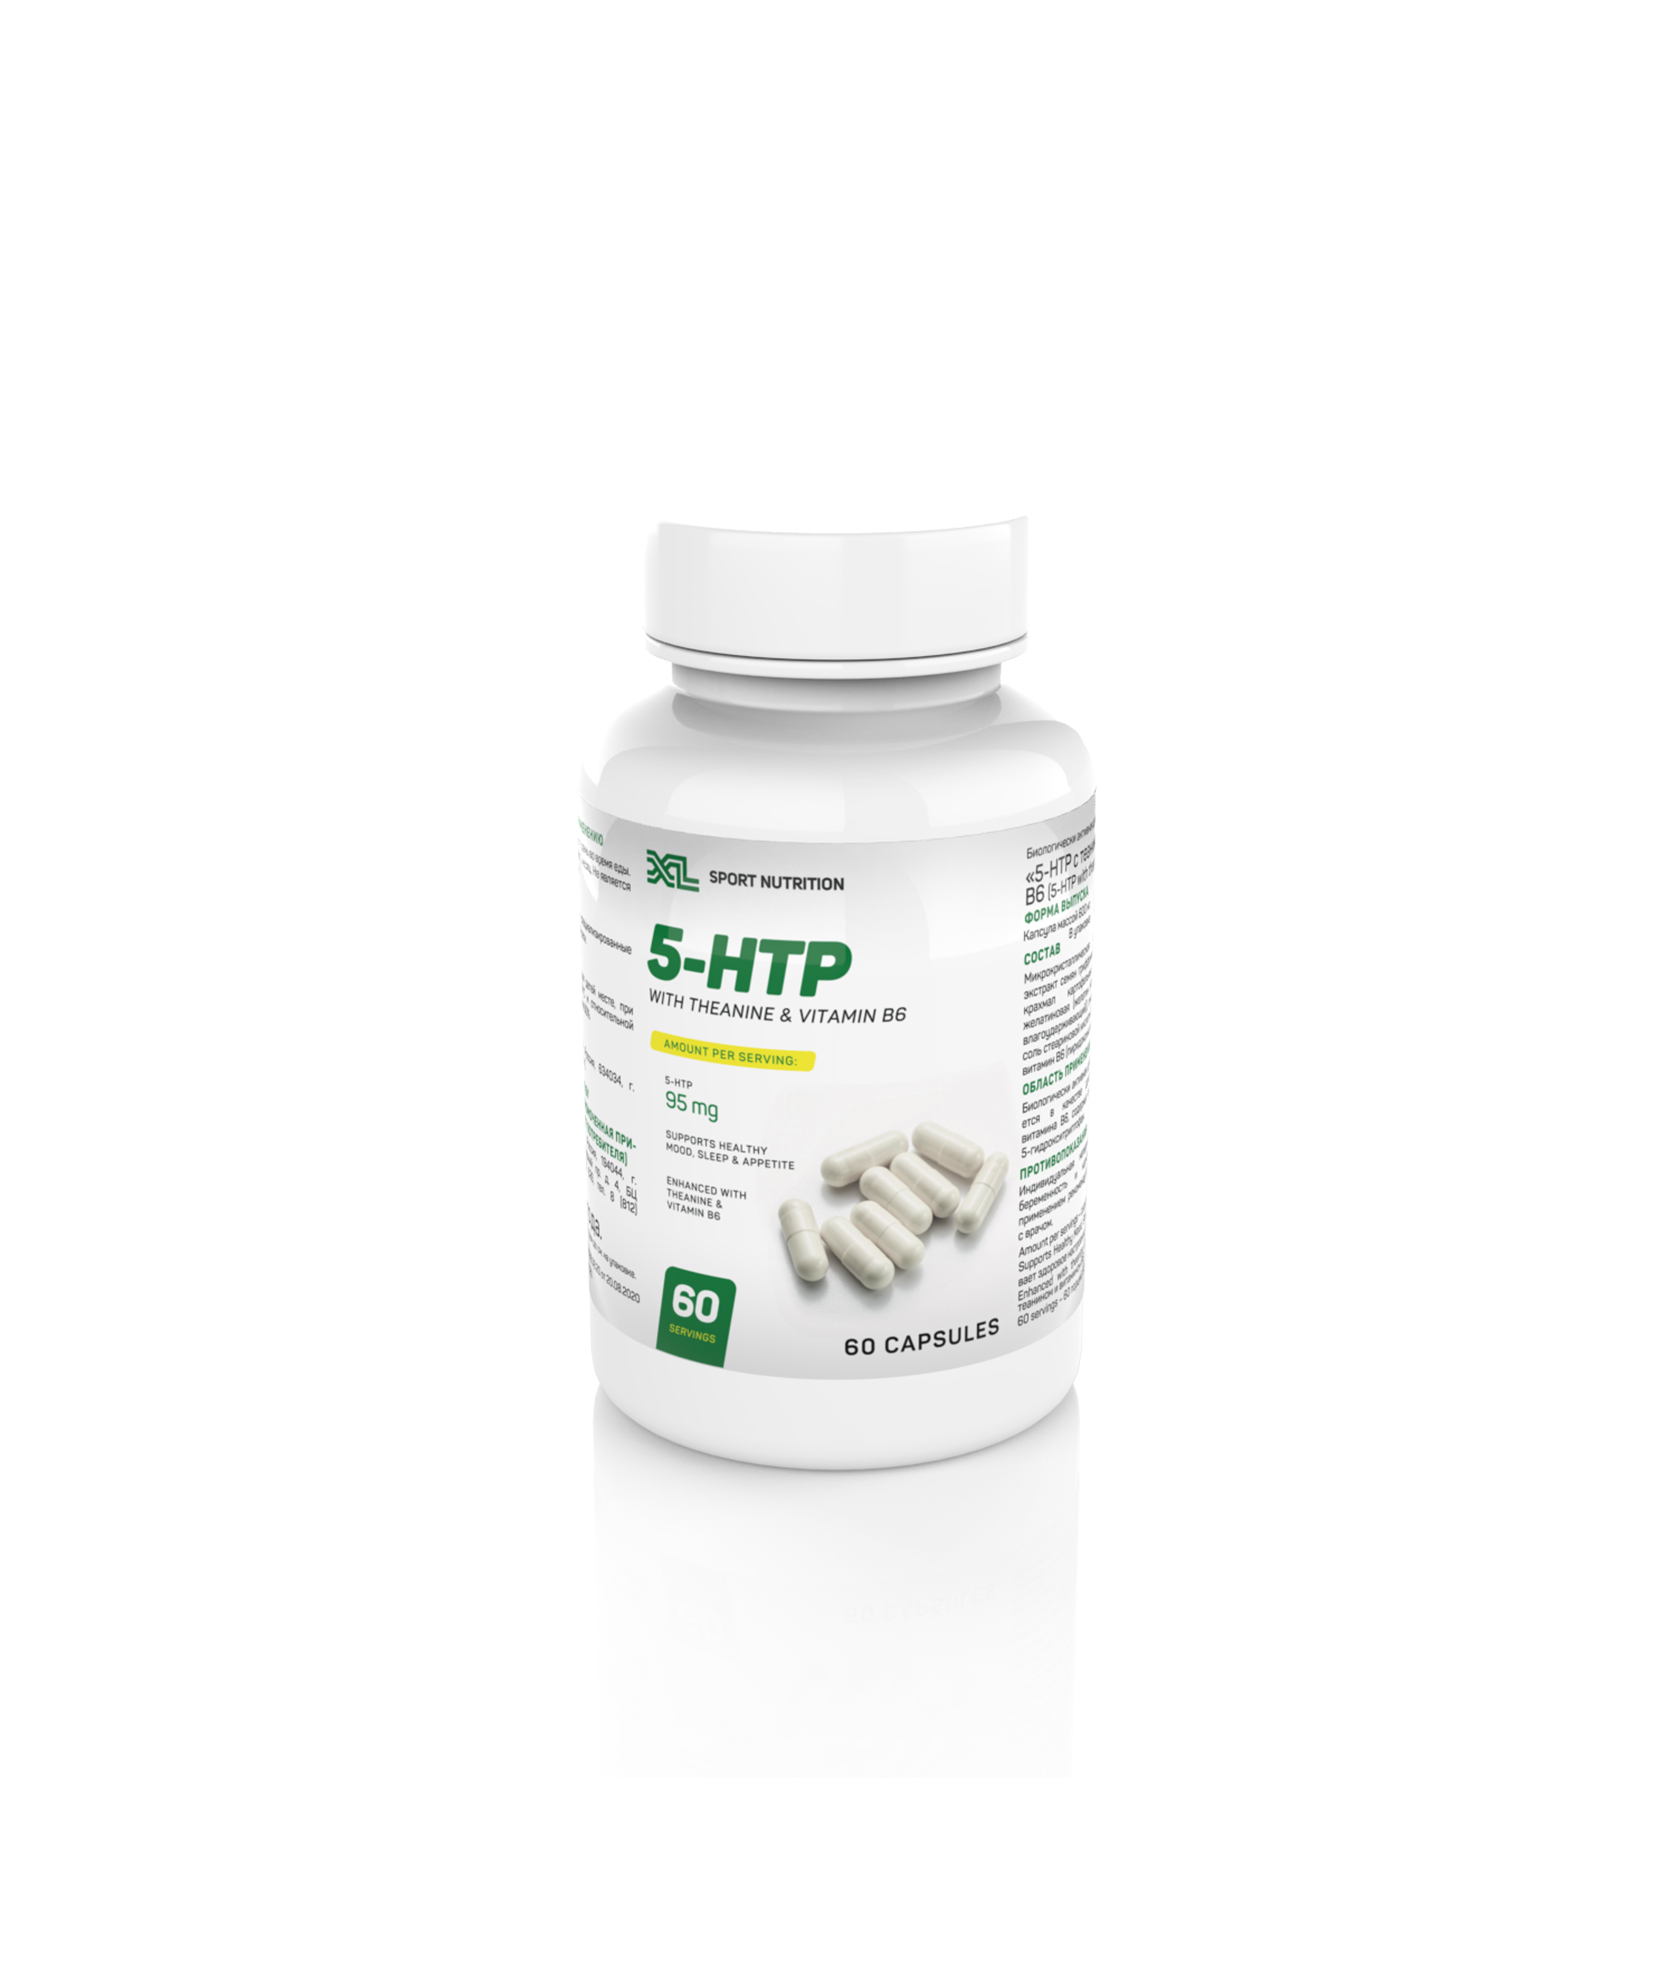 XL 5-HTP with theanine and vitamin B6, 60 capsules